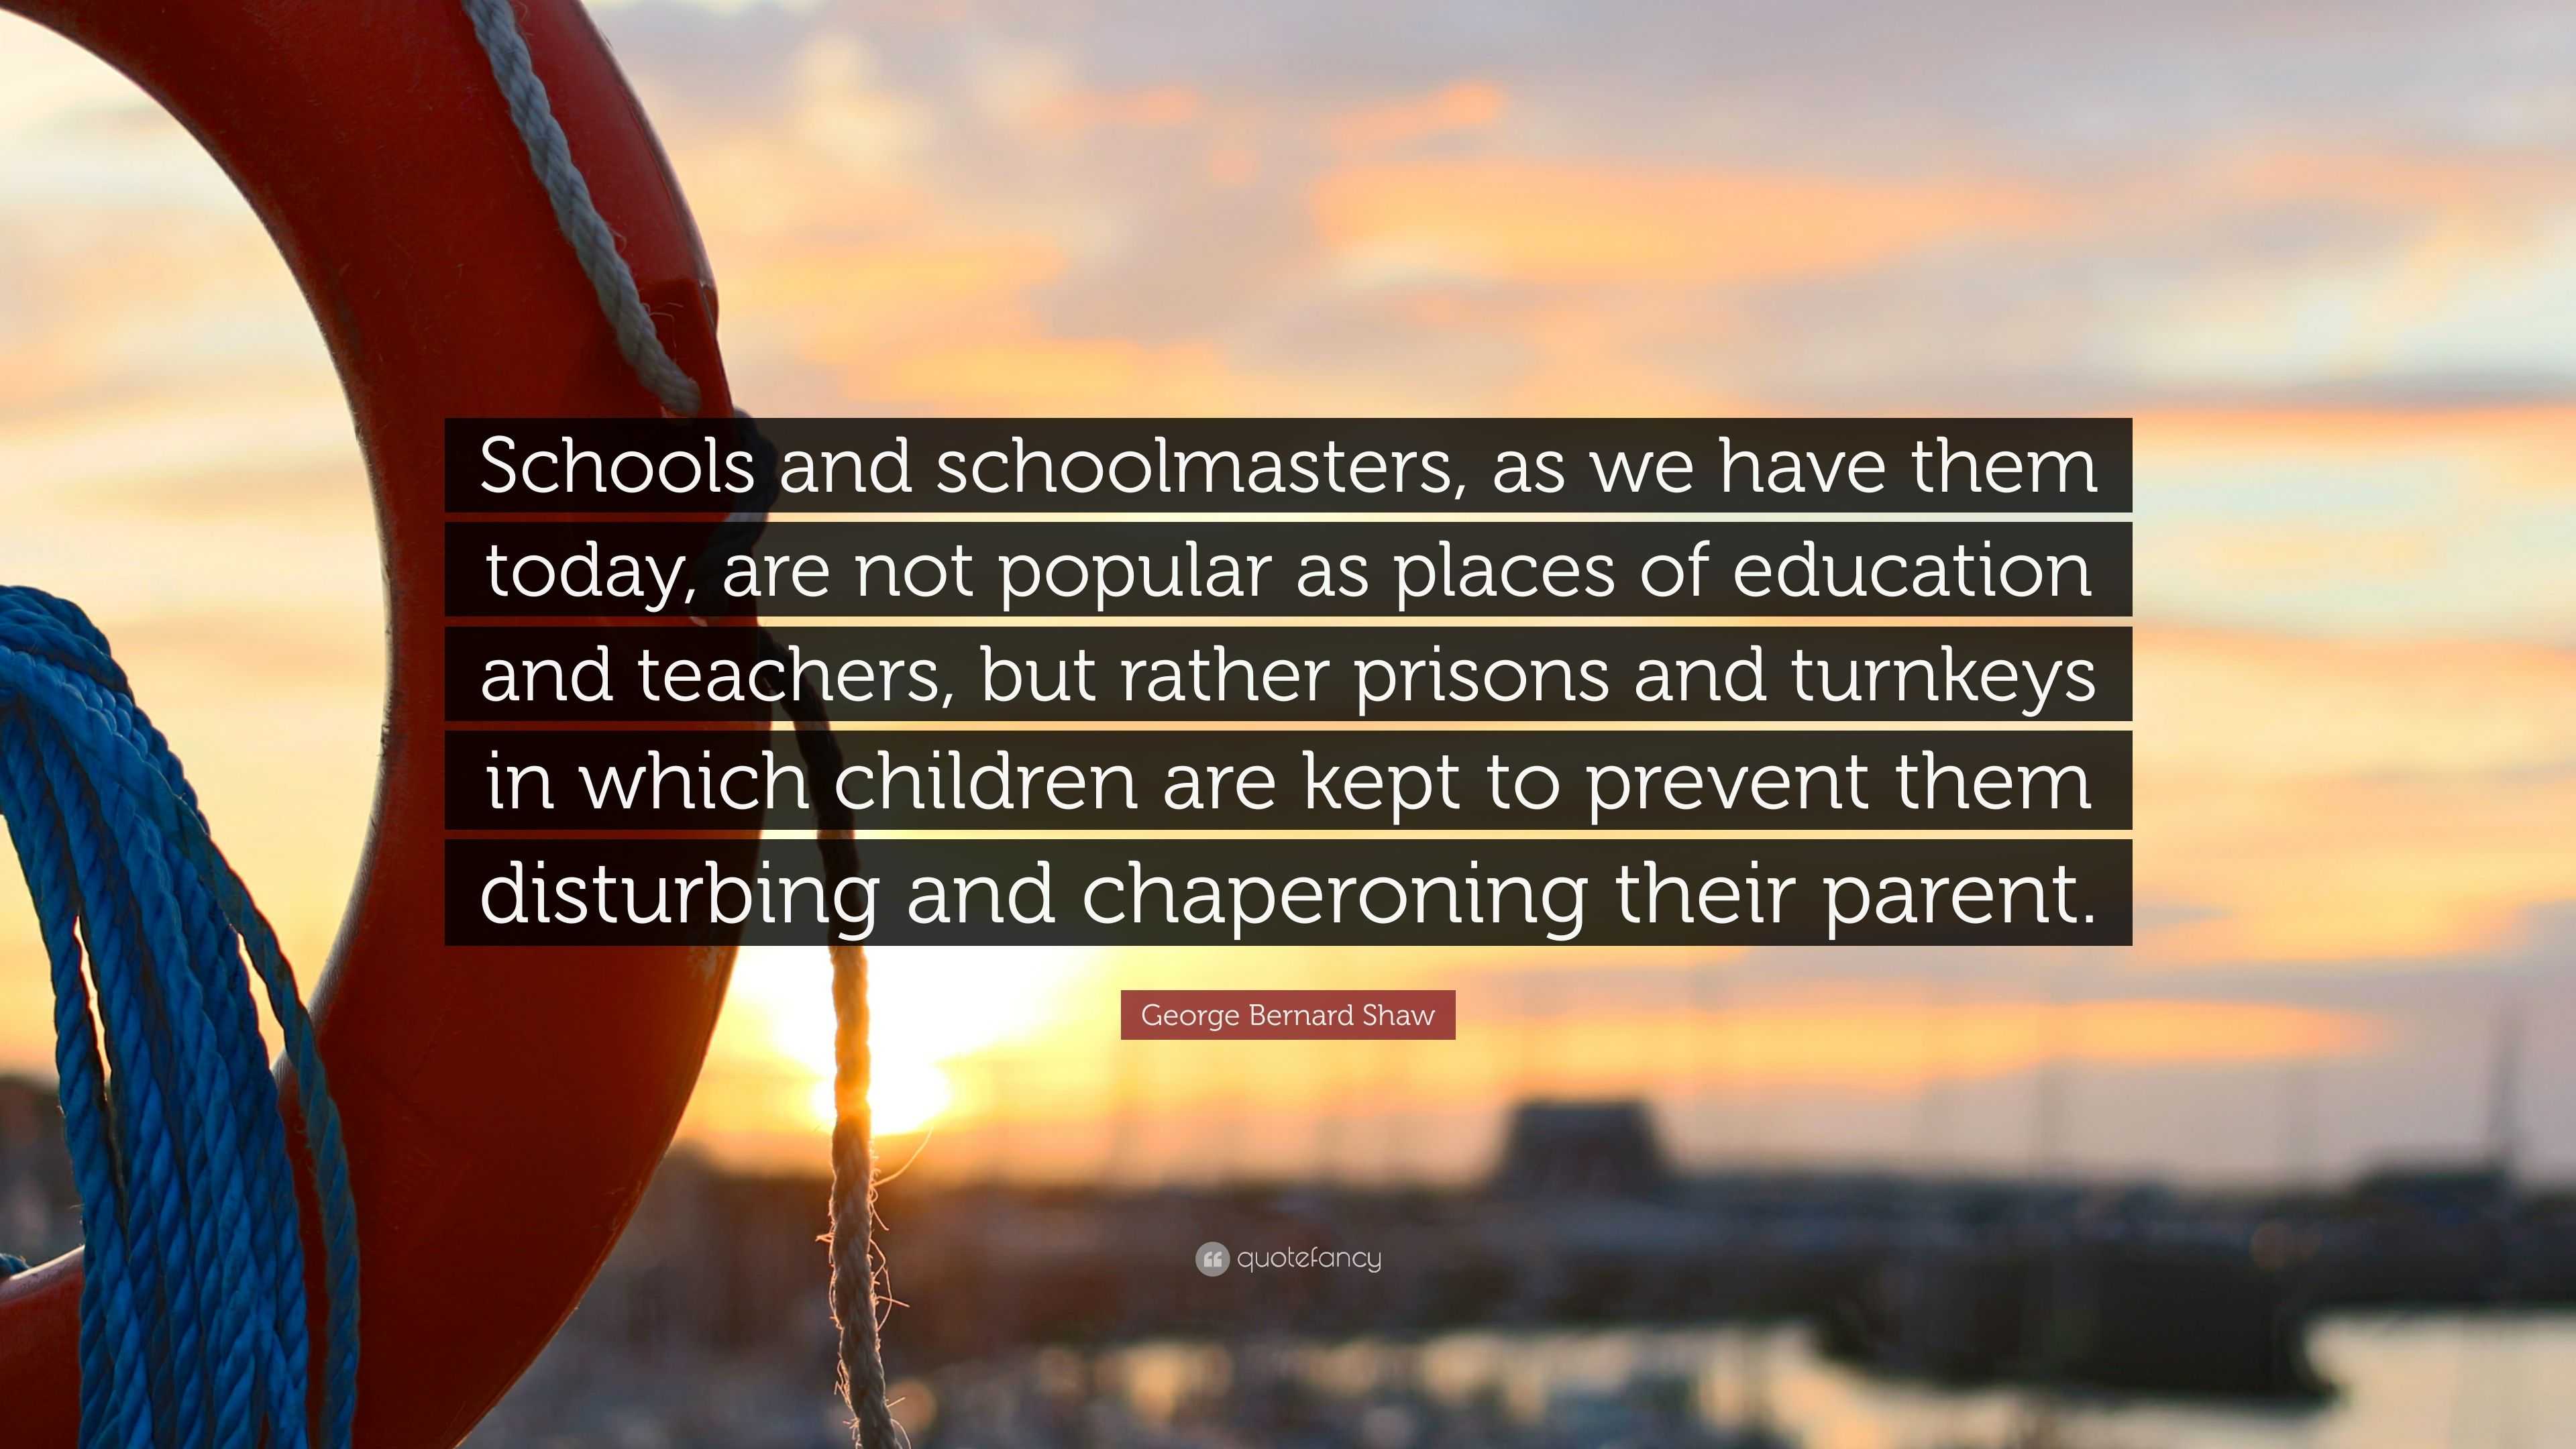 George Bernard Shaw Quote: “Schools and schoolmasters, as we have them ...